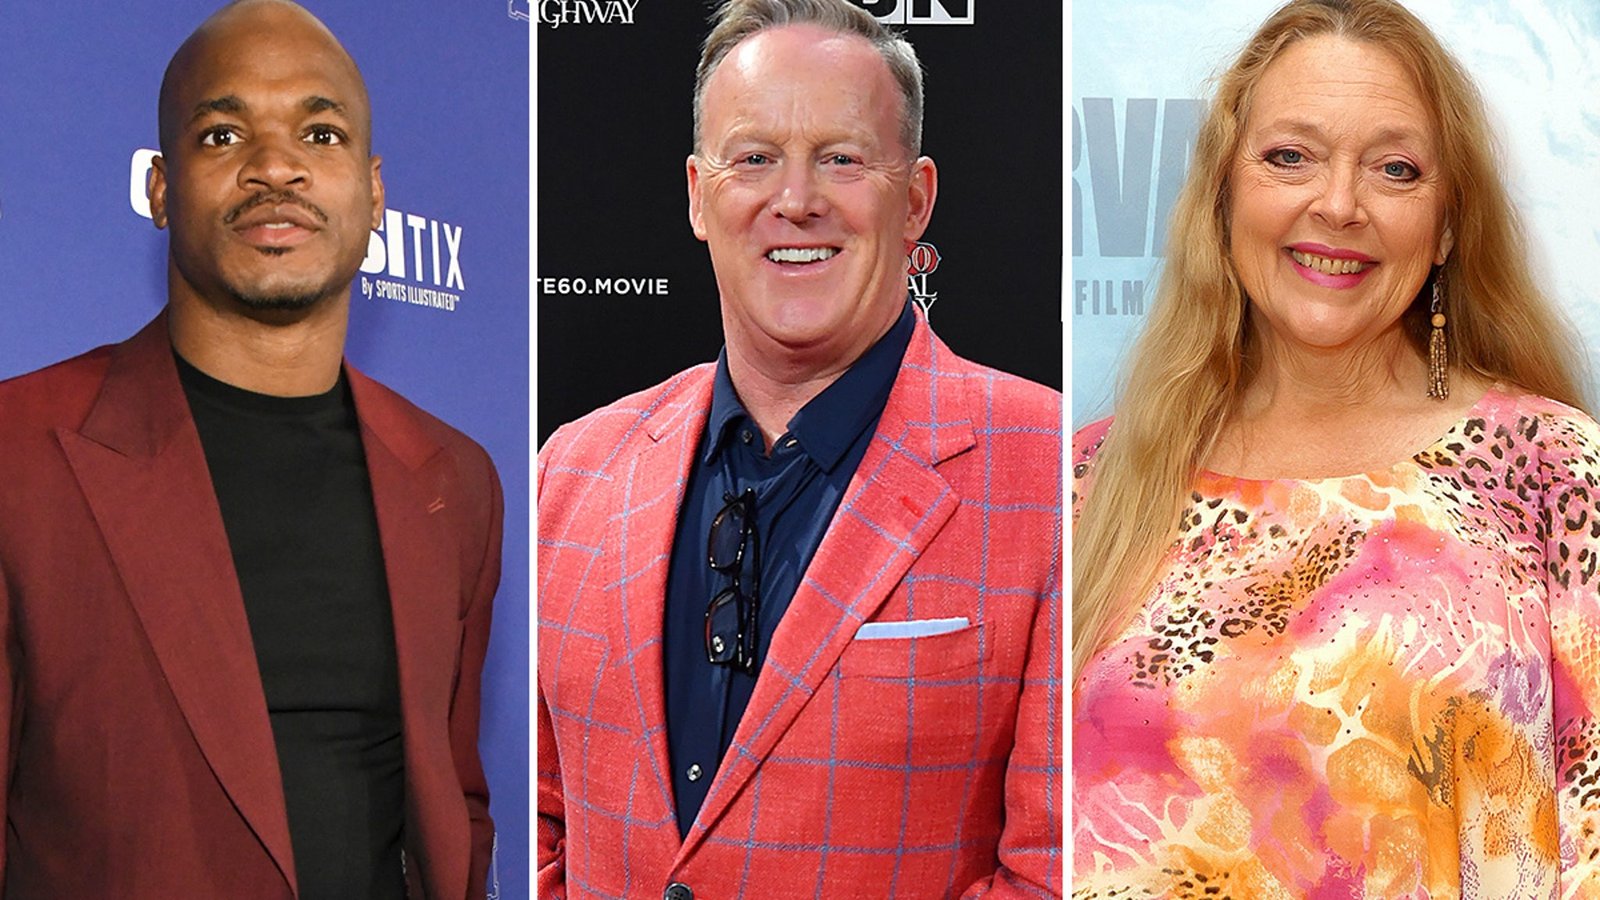 DWTS Producers Argue ‘Clickbait’ Casting Like Carole Baskin, Sean Spicer Has to Be Finished